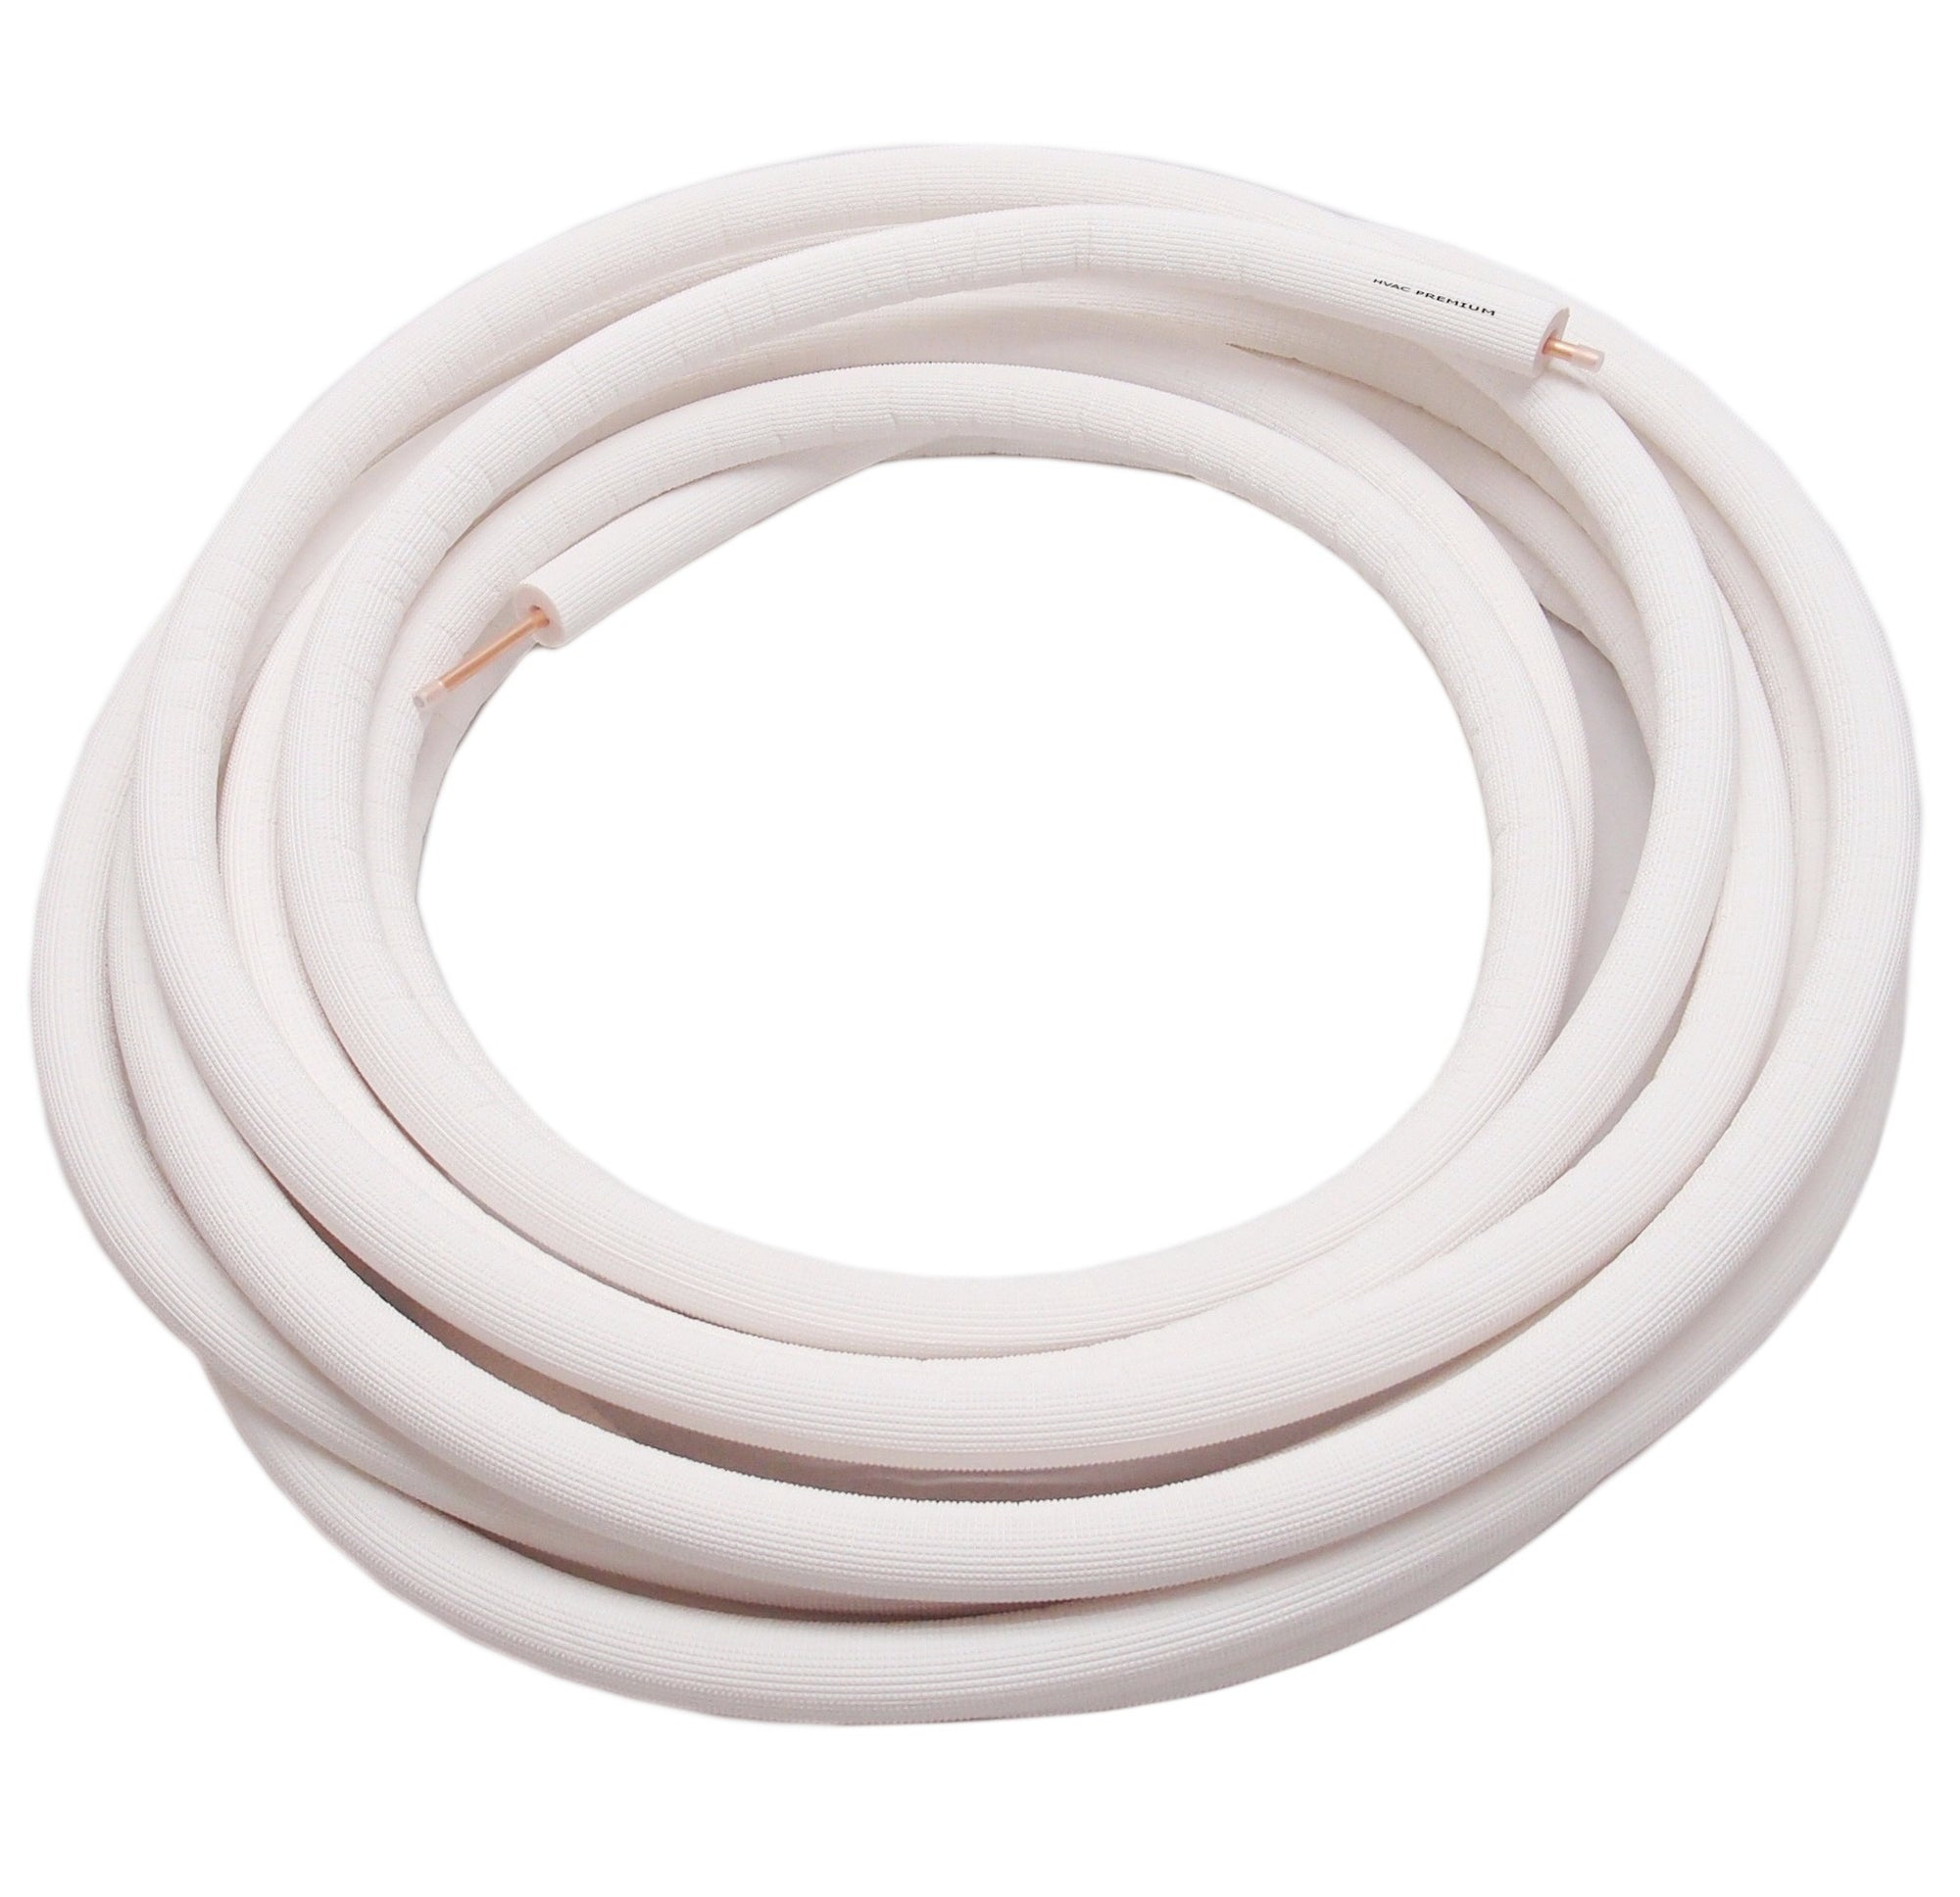 1/2" Insulated Copper Coil Line - Seamless Pipe Tube for HVAC, Refrigerant - 1/2" White Insulation - 15' Long